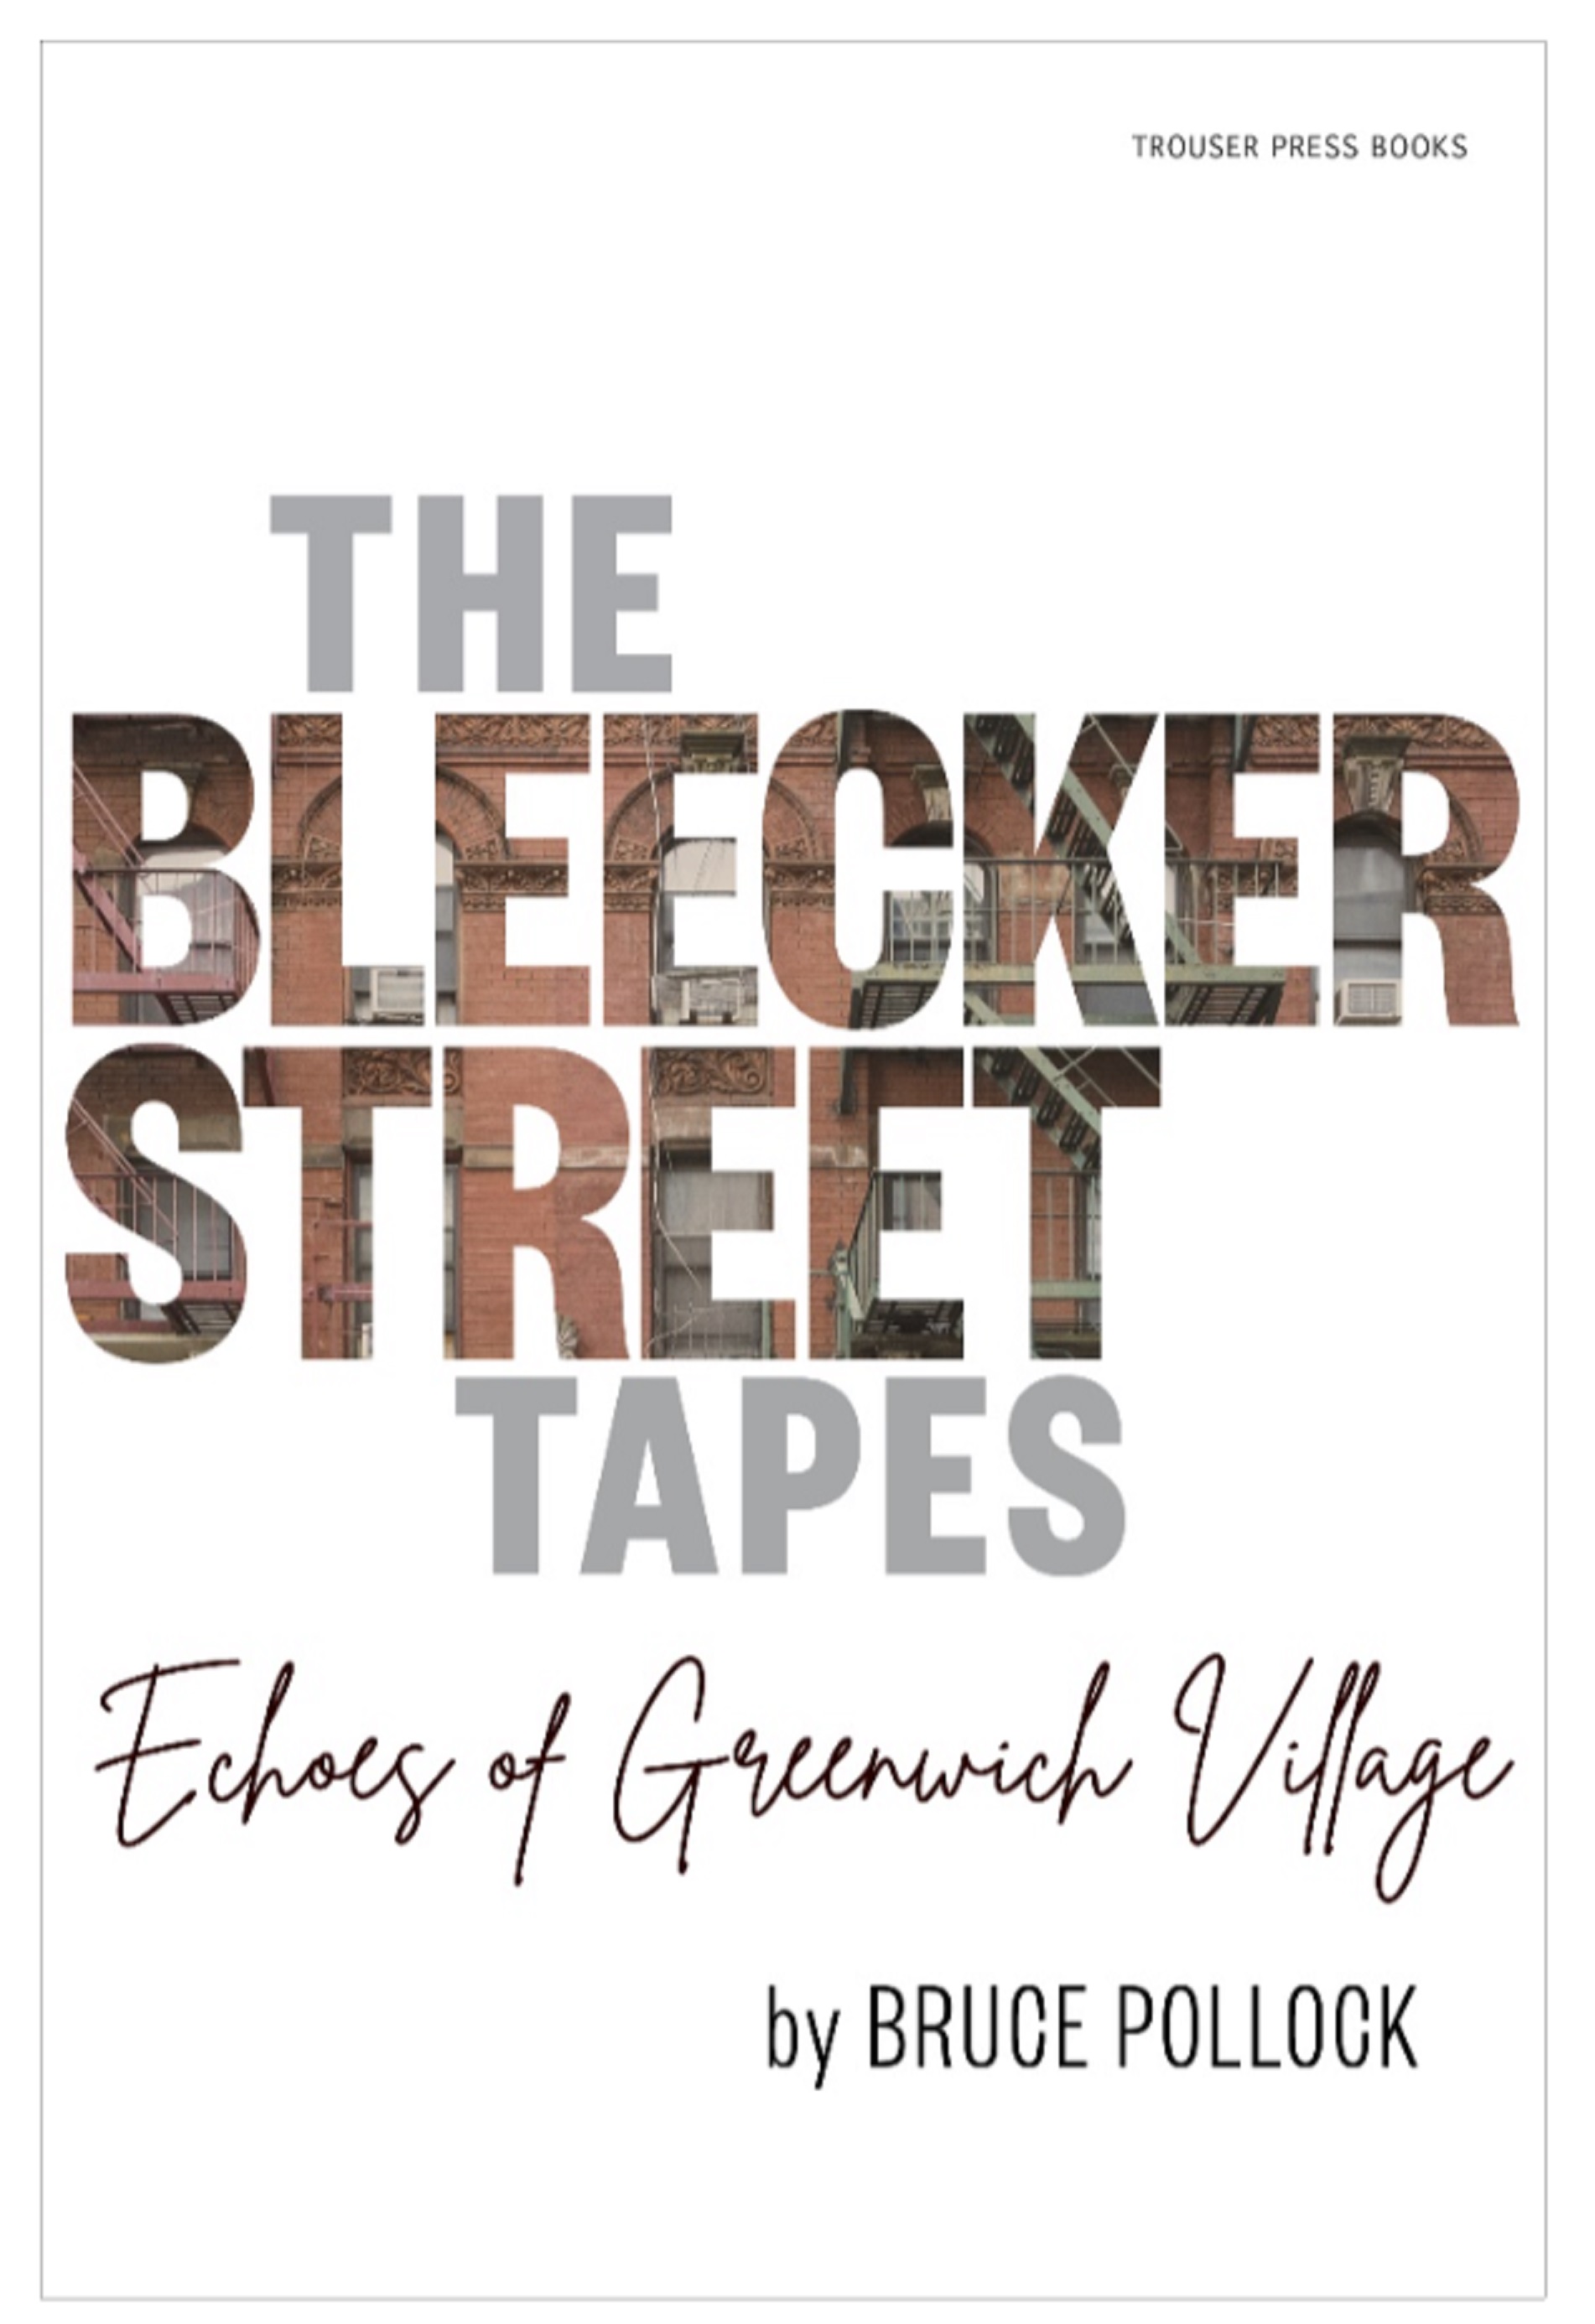 Trouser Press Books to publish The Bleecker Street Tapes: Echoes of Greenwich Village